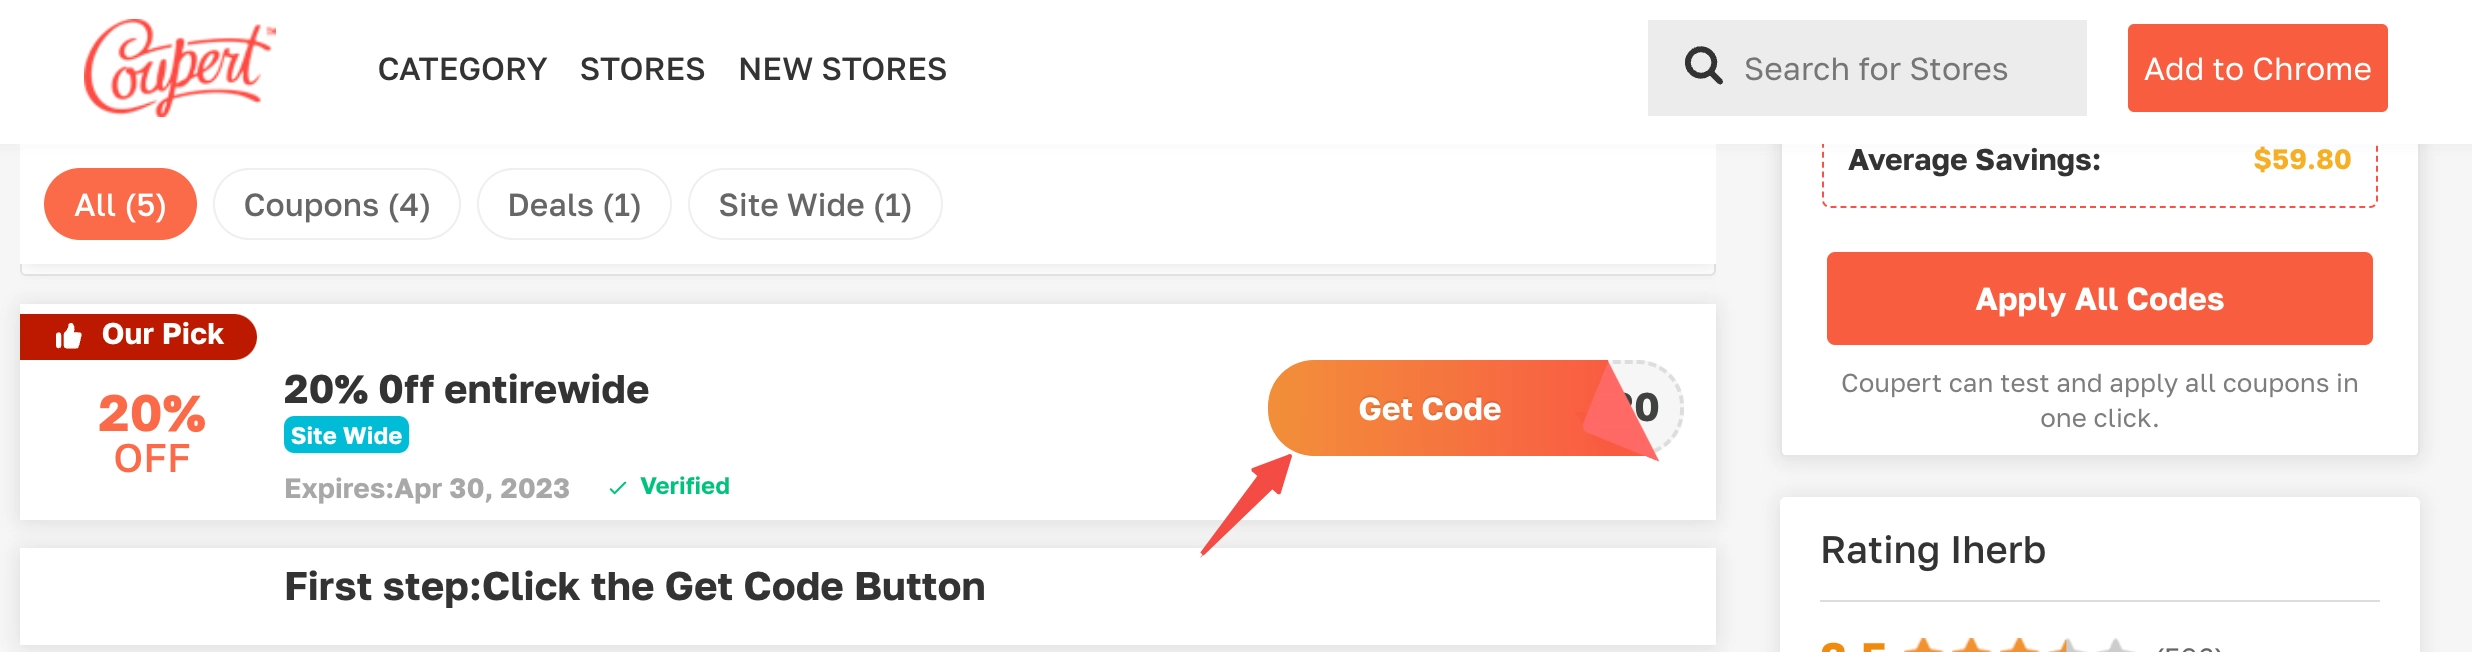 Step 1:  Select Jetbrains Discount Code and click on "Get Code" or "Get Deal".